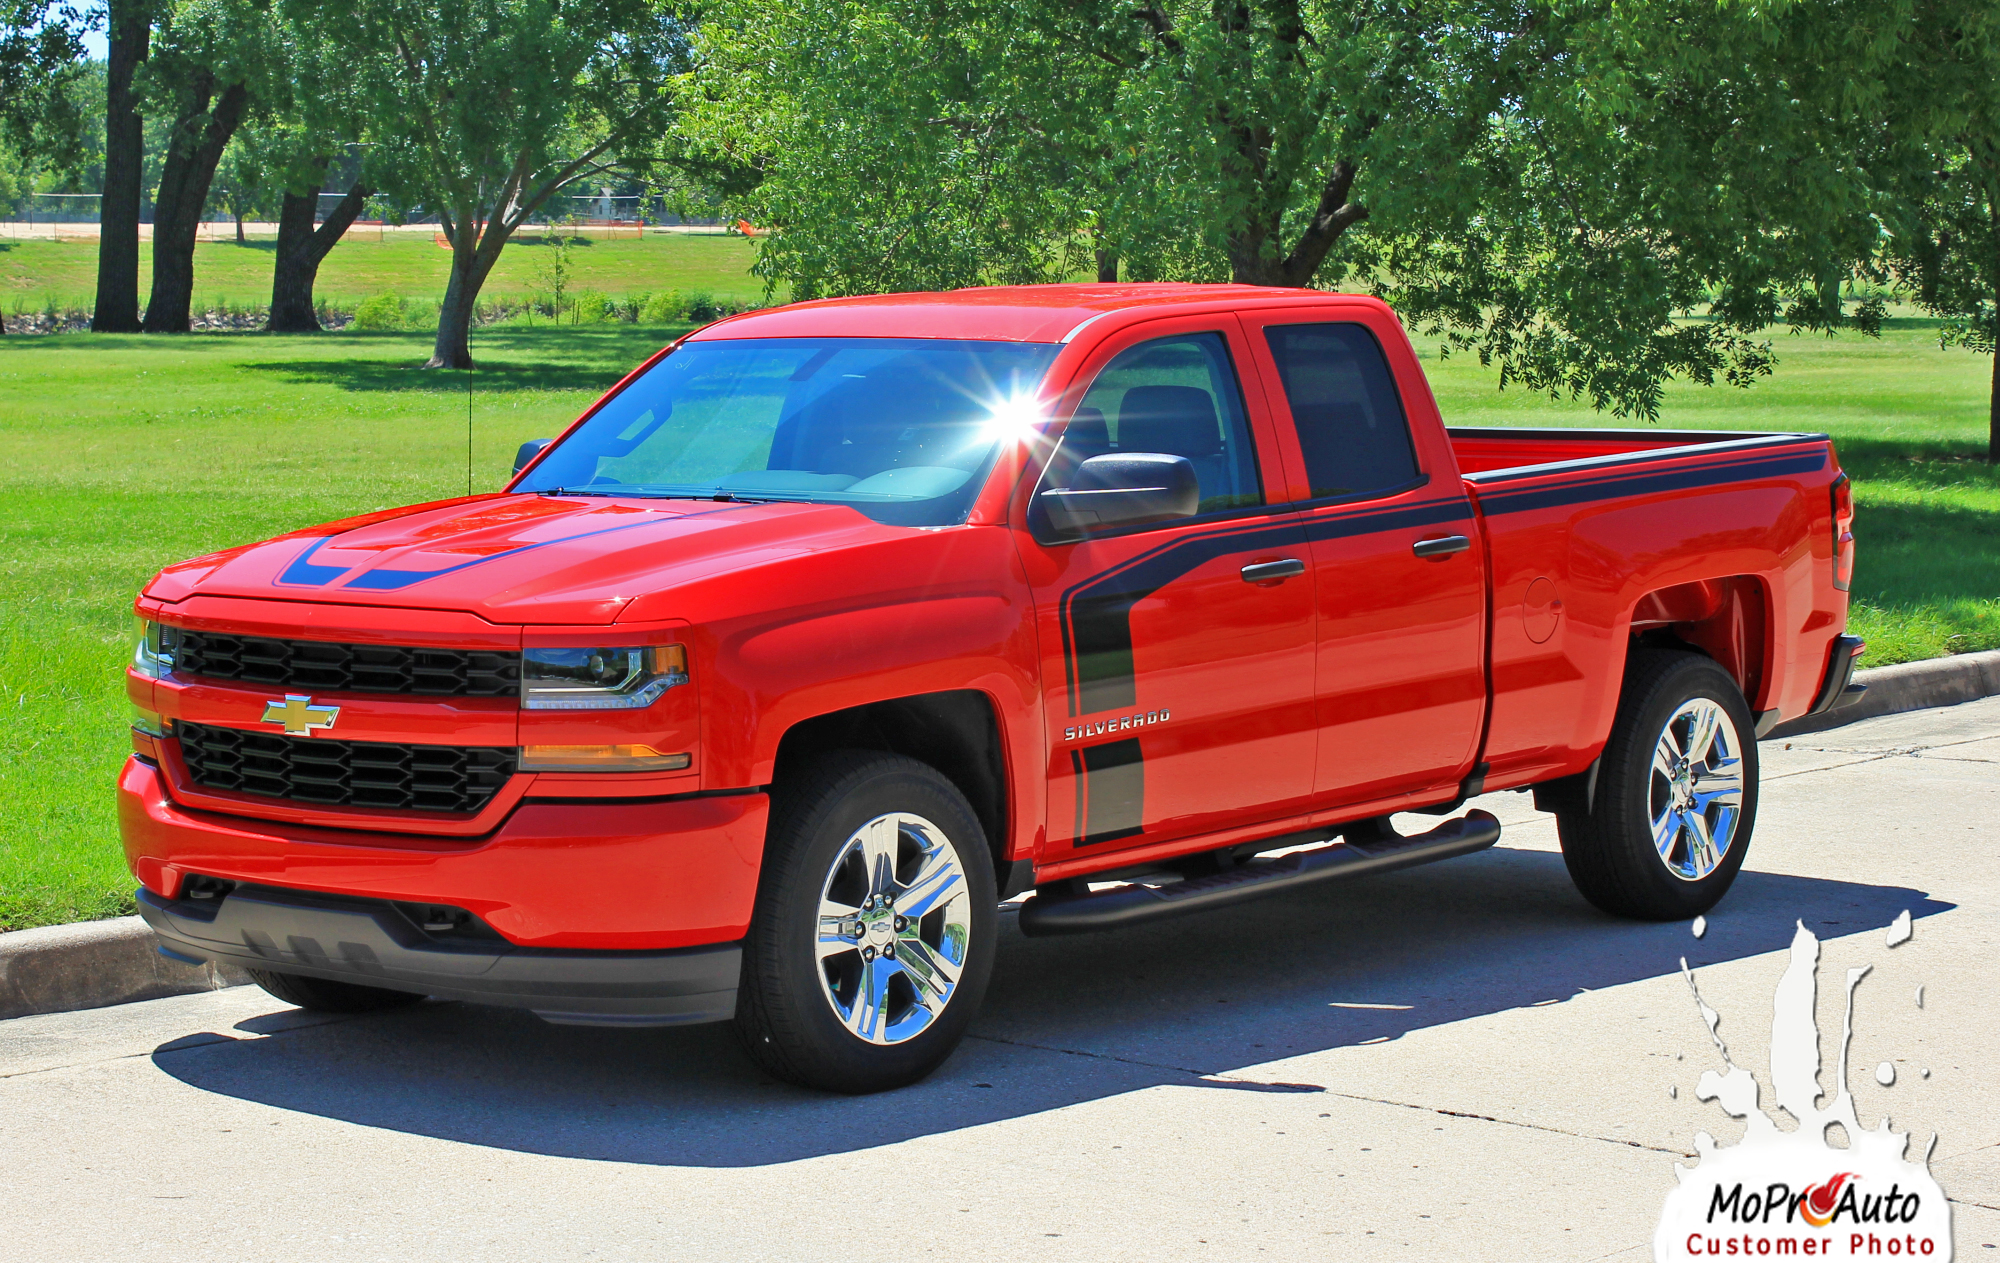 FLOW Special Edition Rally Style 2016 2017 2018 Chevy Silverado - MoProAuto Pro Design Series Vinyl Graphics, Stripes and Decals Kit